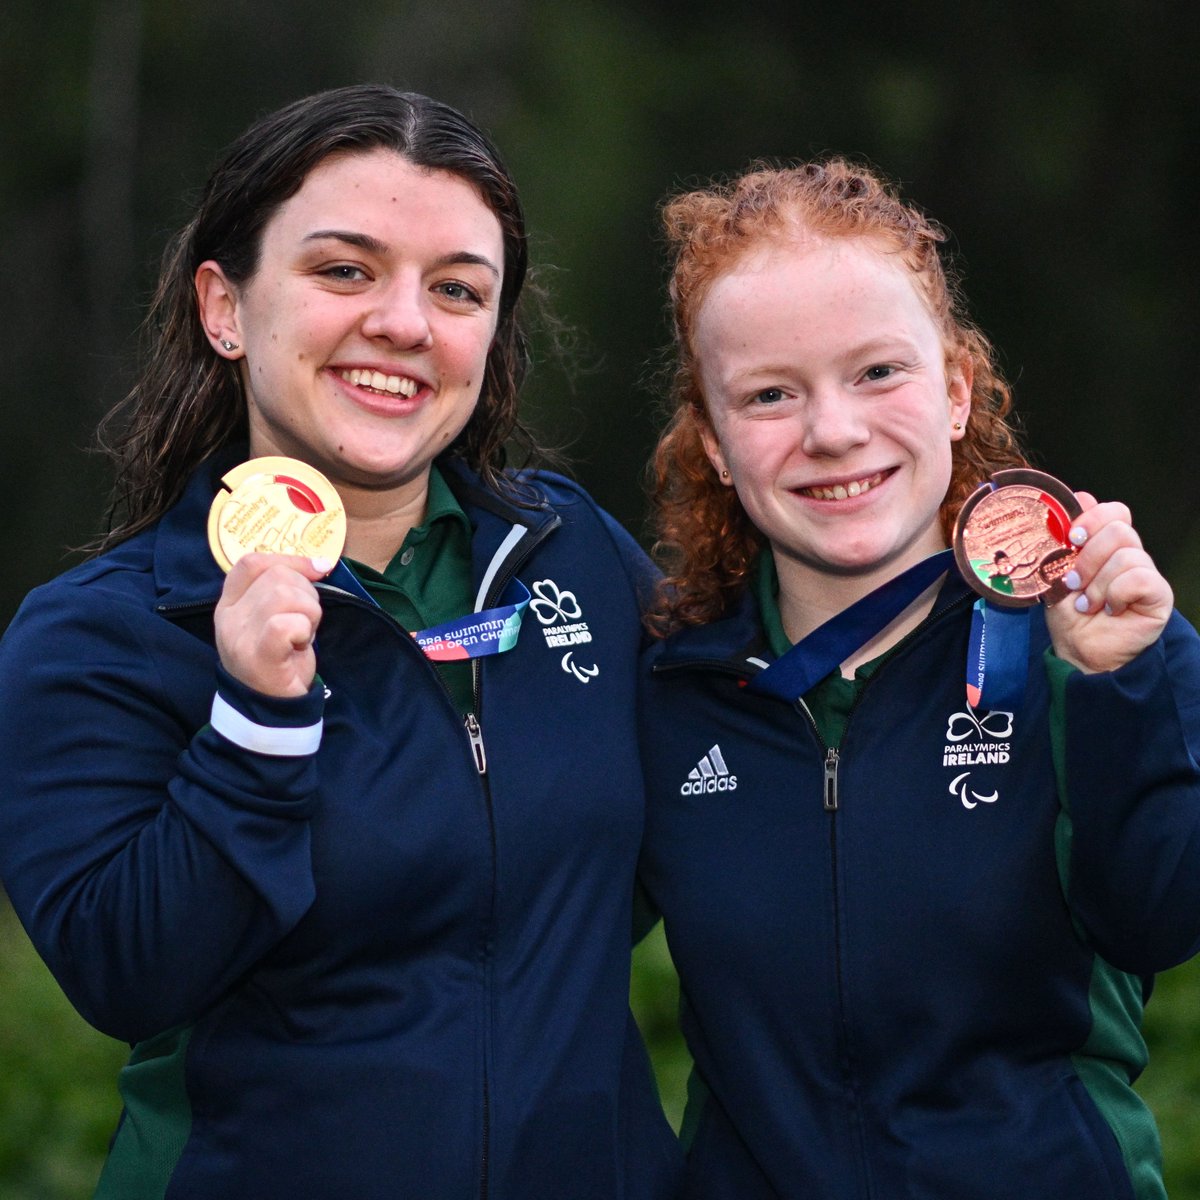 The medals keep coming from Madeira! Nicole Turner (🥇) and Dearbhaile Brady (🥉) both won European medals in the same event last night - bringing Ireland's medal tally to 7️⃣ What a week for Irish Para swimming! Read more 👇 swimireland.ie/2024/04/26/tur…